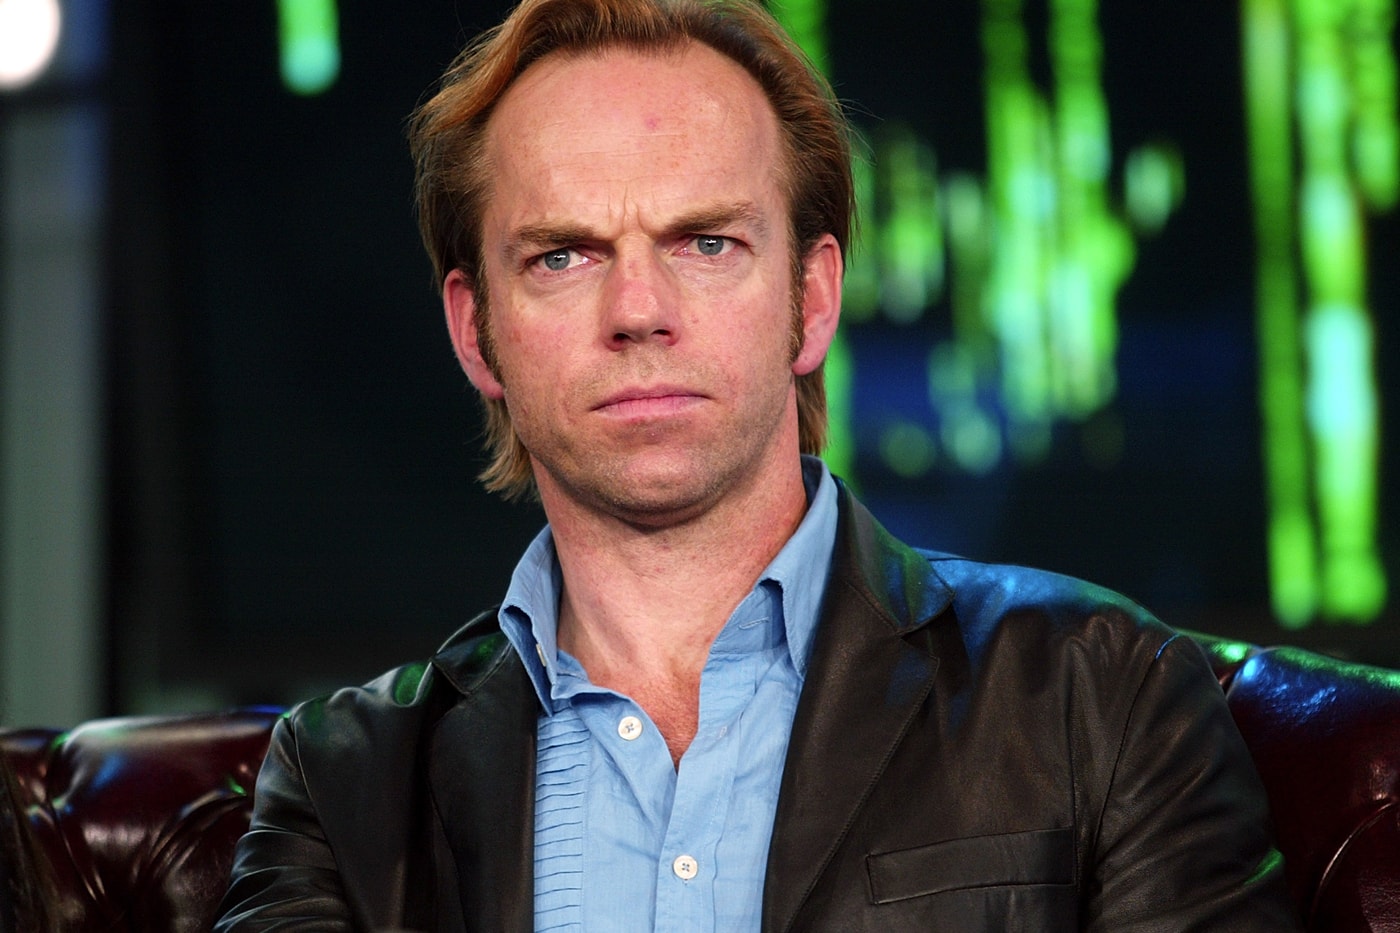 Hugo Weaving ヒューゴ・ウィーヴィン Not Appearing エージェントスミス matrix 4 Agent Smith マトリックス４ confirmed keanu reeves neo キアヌリーブス SF 映画